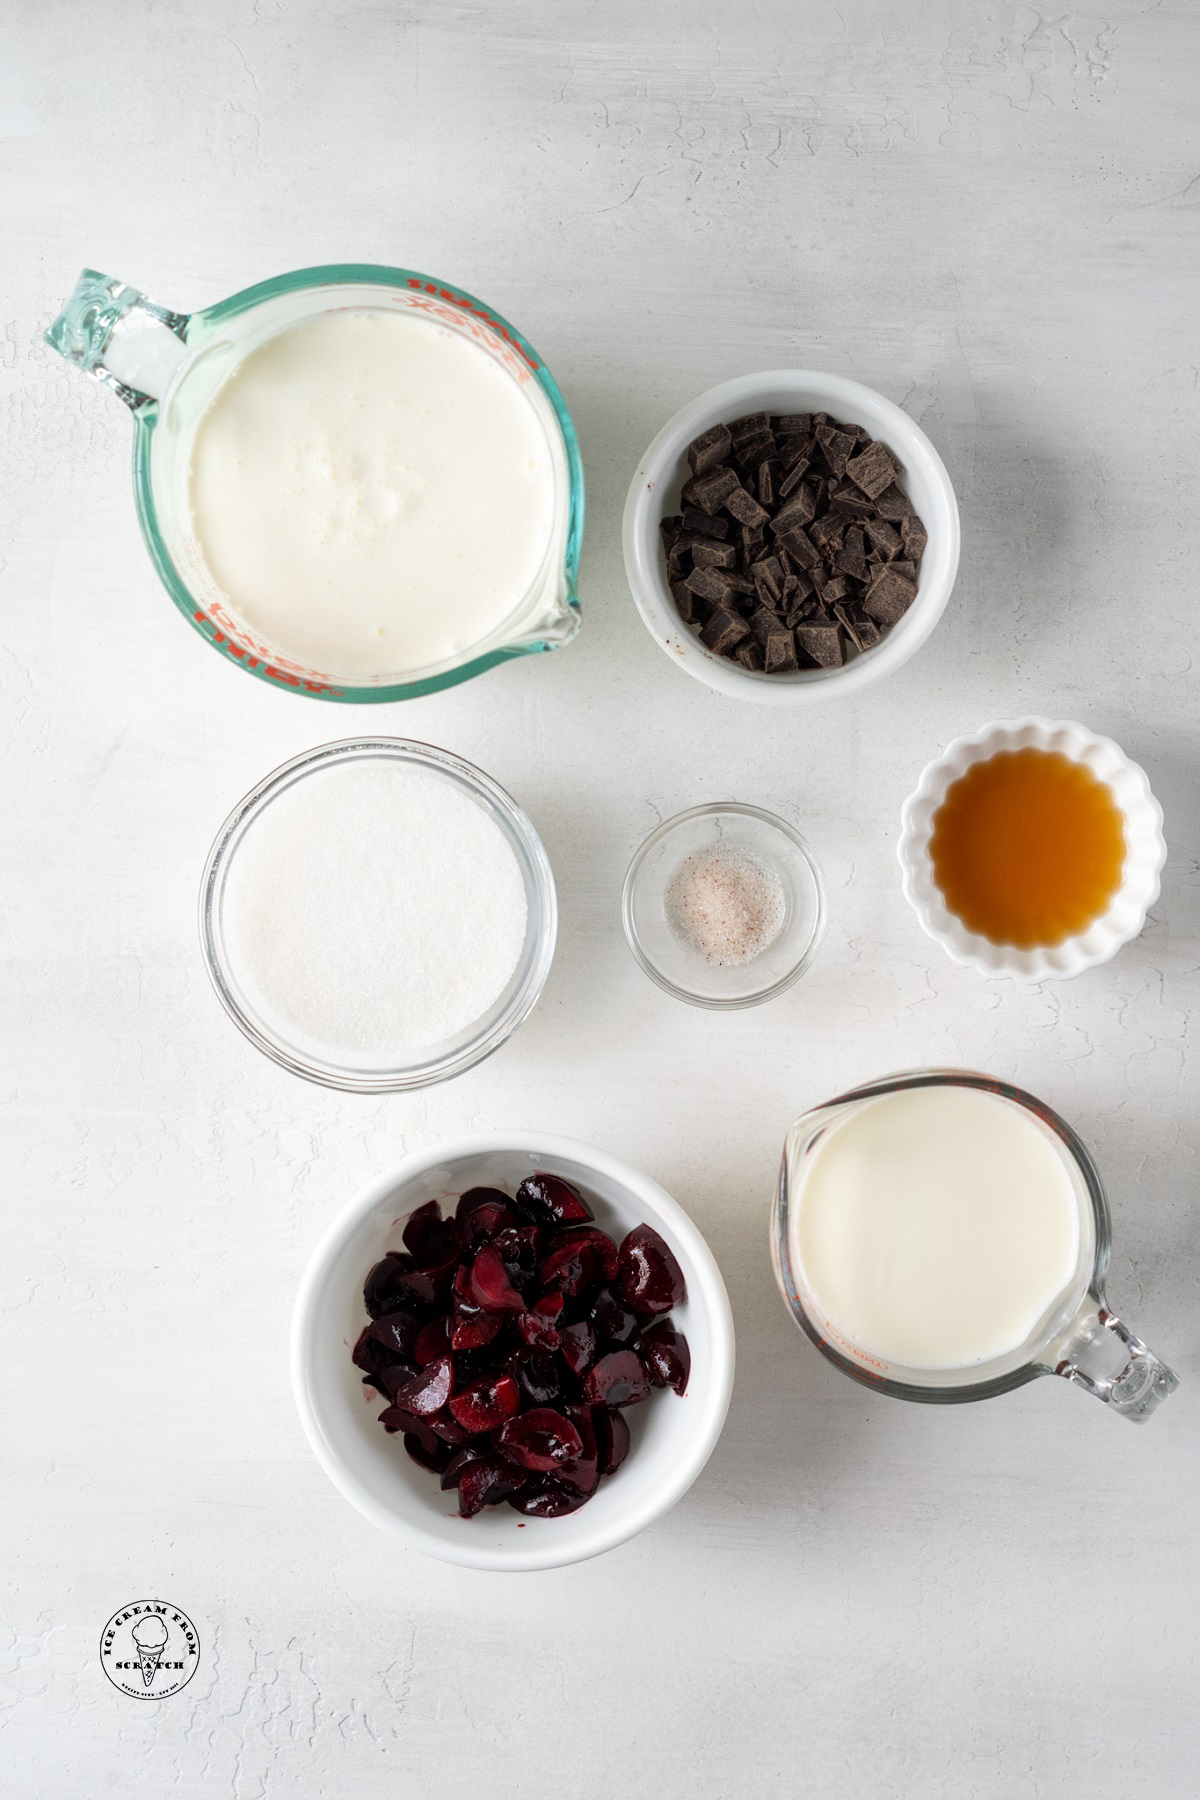 The ingredients needed to make amaretto ice cream recipe, including cherries and chocolate chunks. Each ingredient is measured into a bowl.